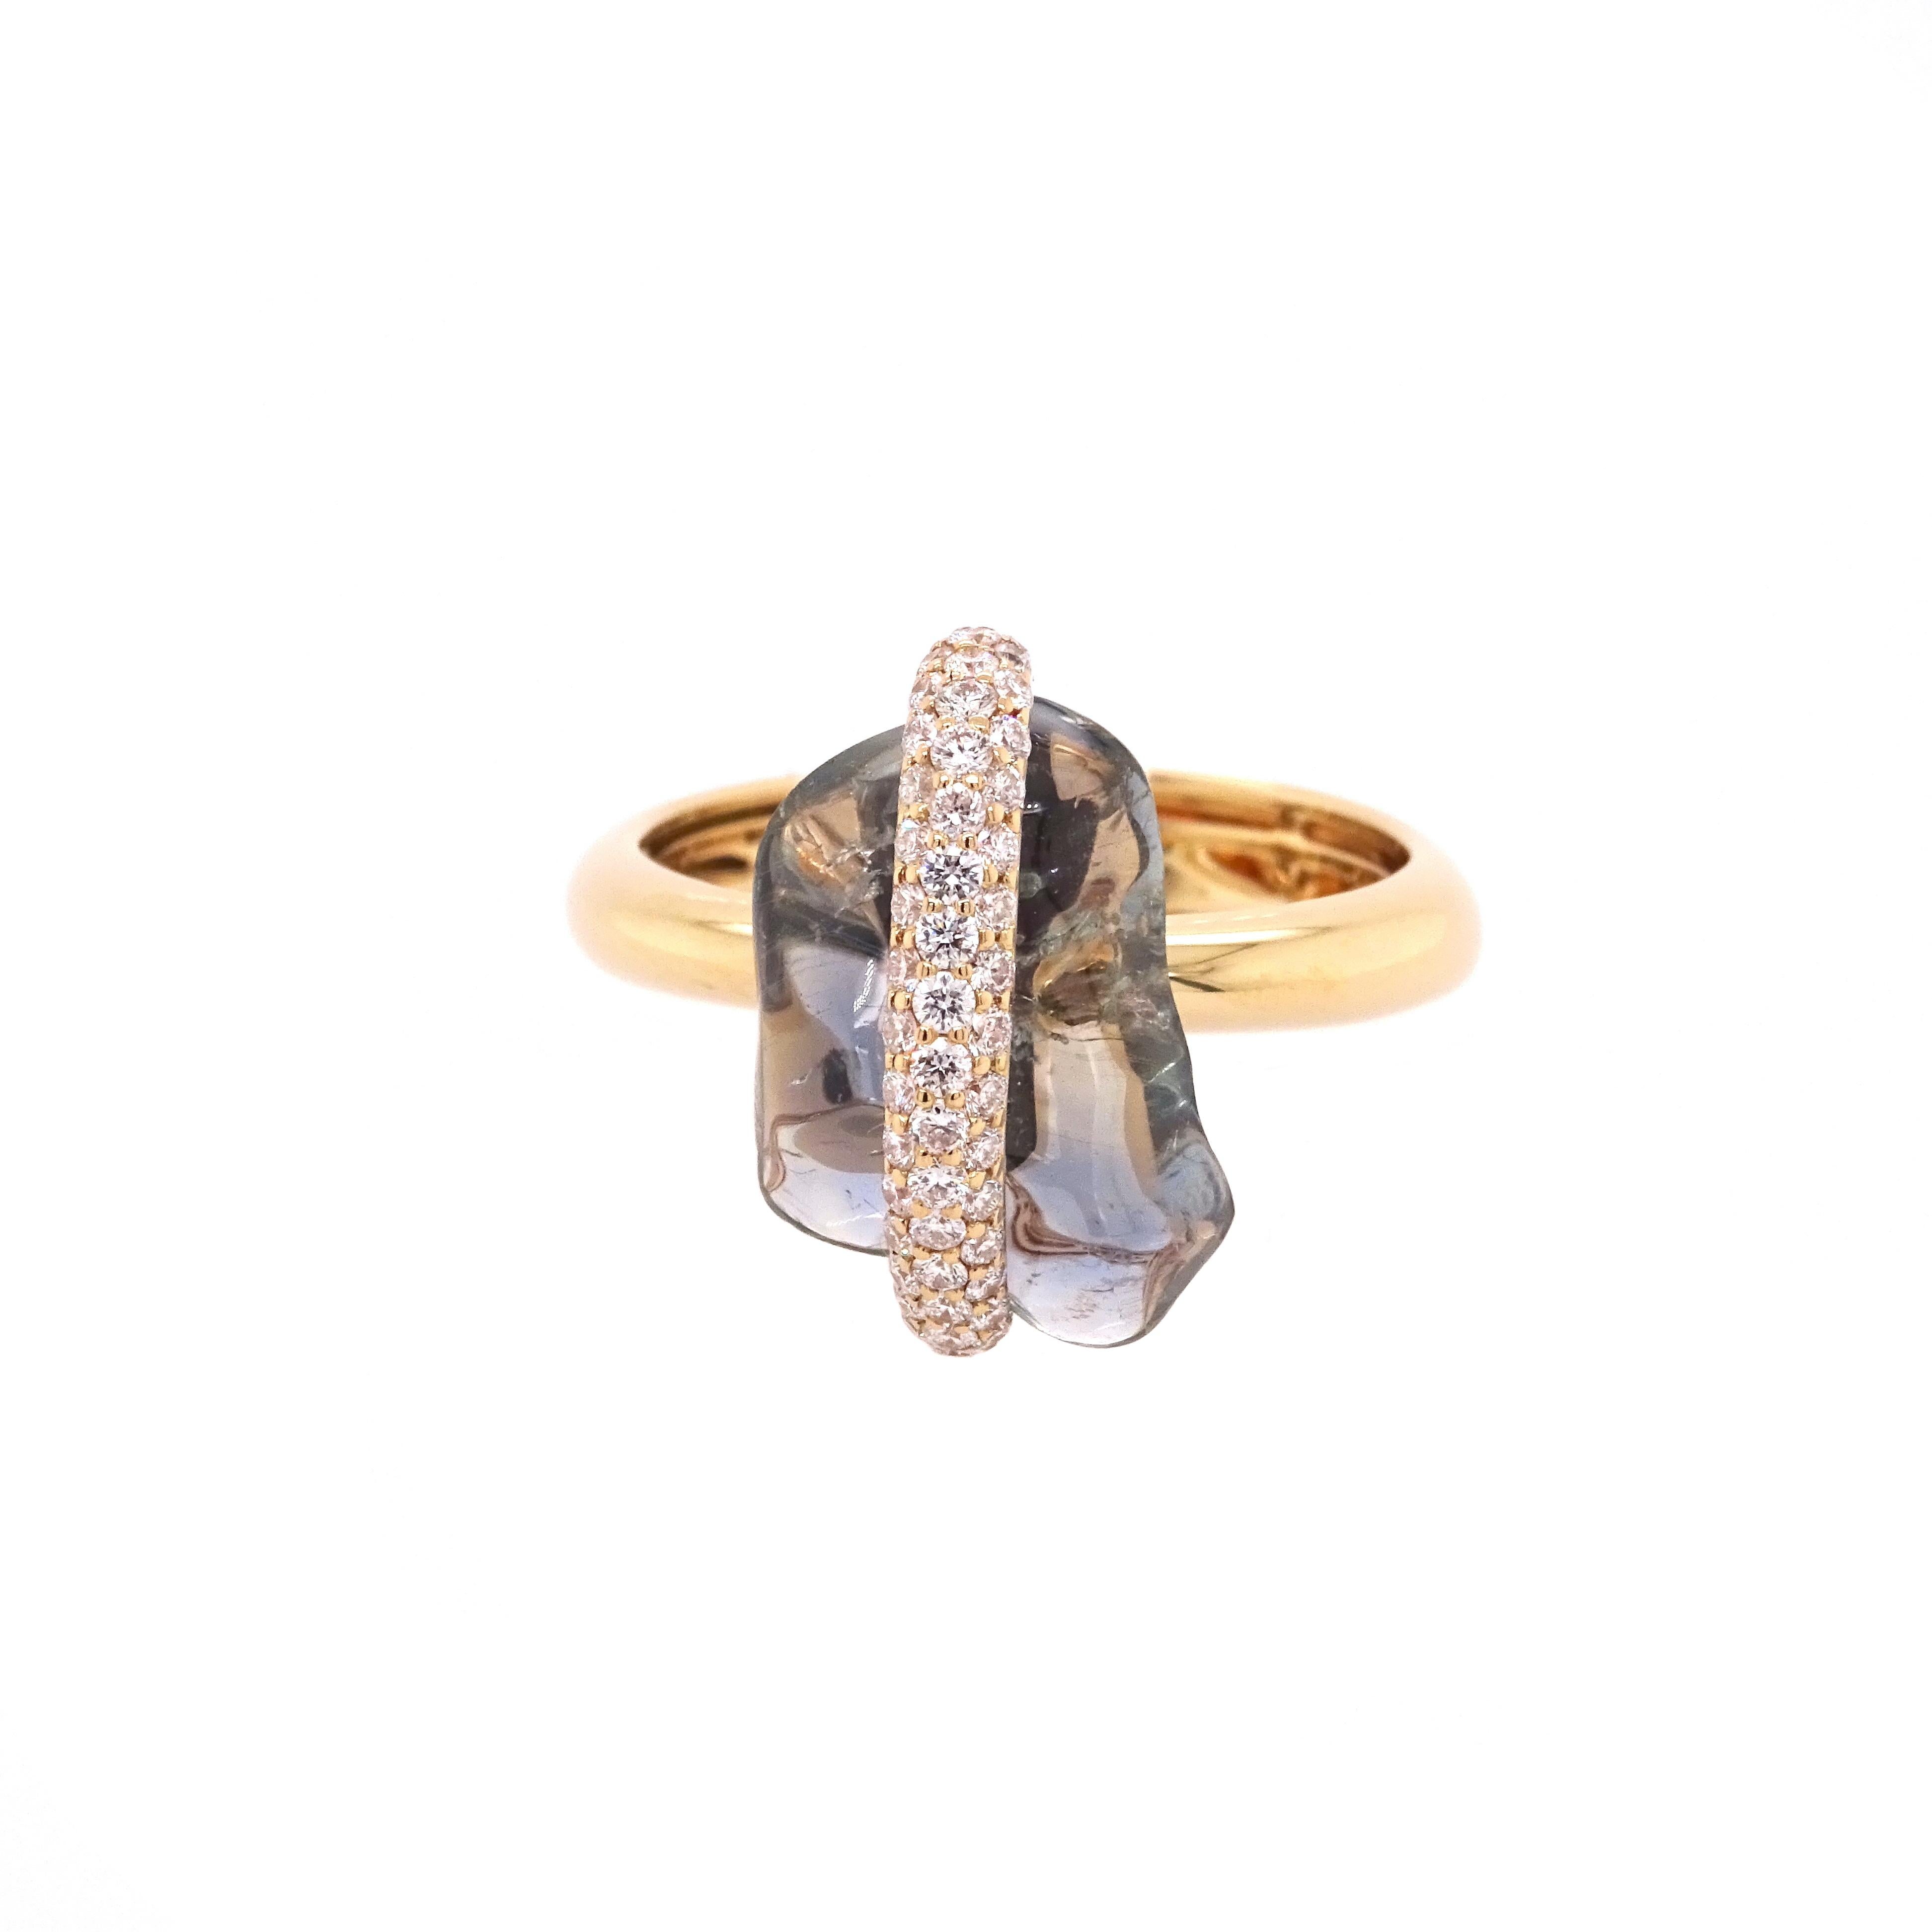 Ring from Organic Collection by VOTIVE.

Embrace the allure of the Organic Collection by VOTIVE with this captivating ring at its heart. A mesmerizing uncut blue sapphire takes center stage, surrounded by a graceful line of dazzling diamonds, all